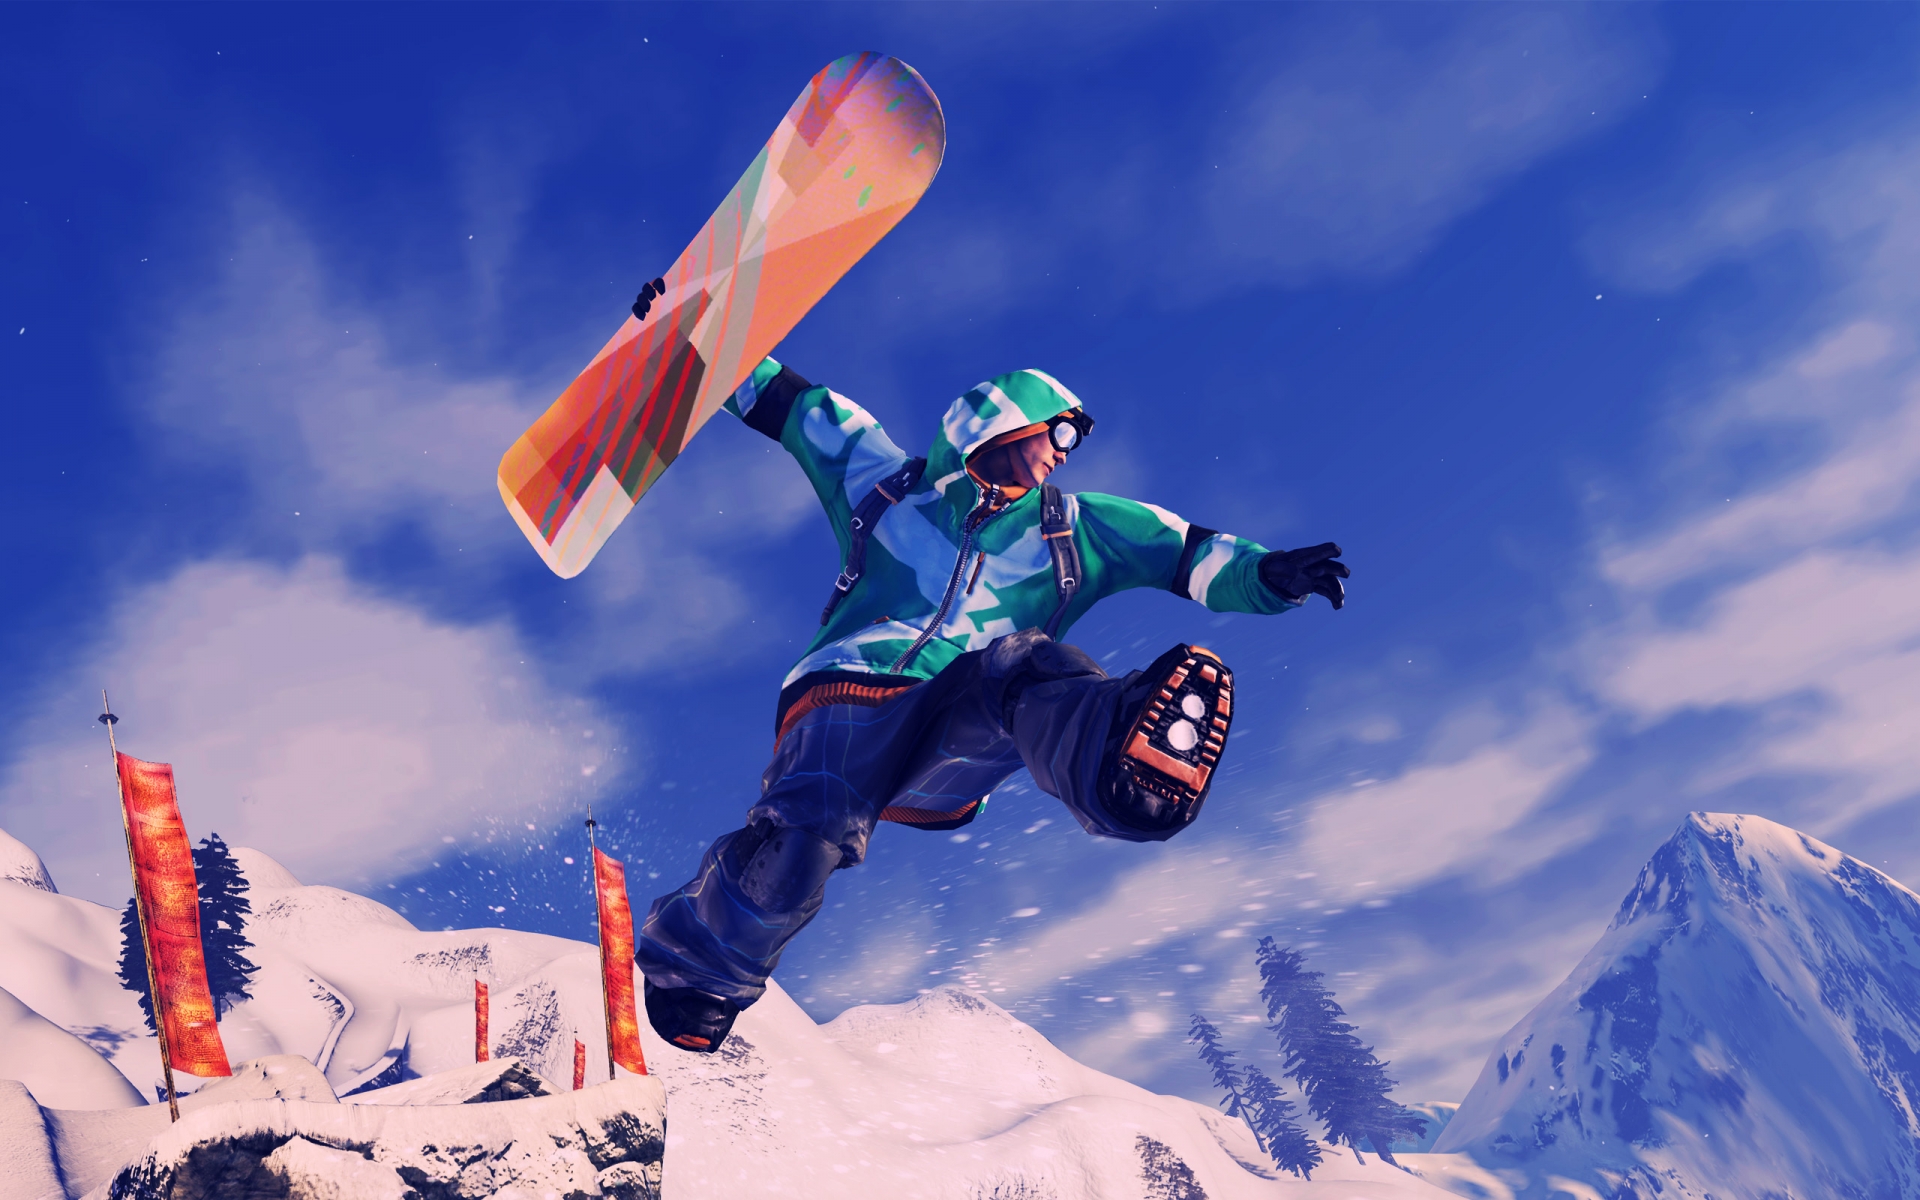 Wallpapers Snowboarding Ssx For X Widescreen Hd Wide 1920x1200